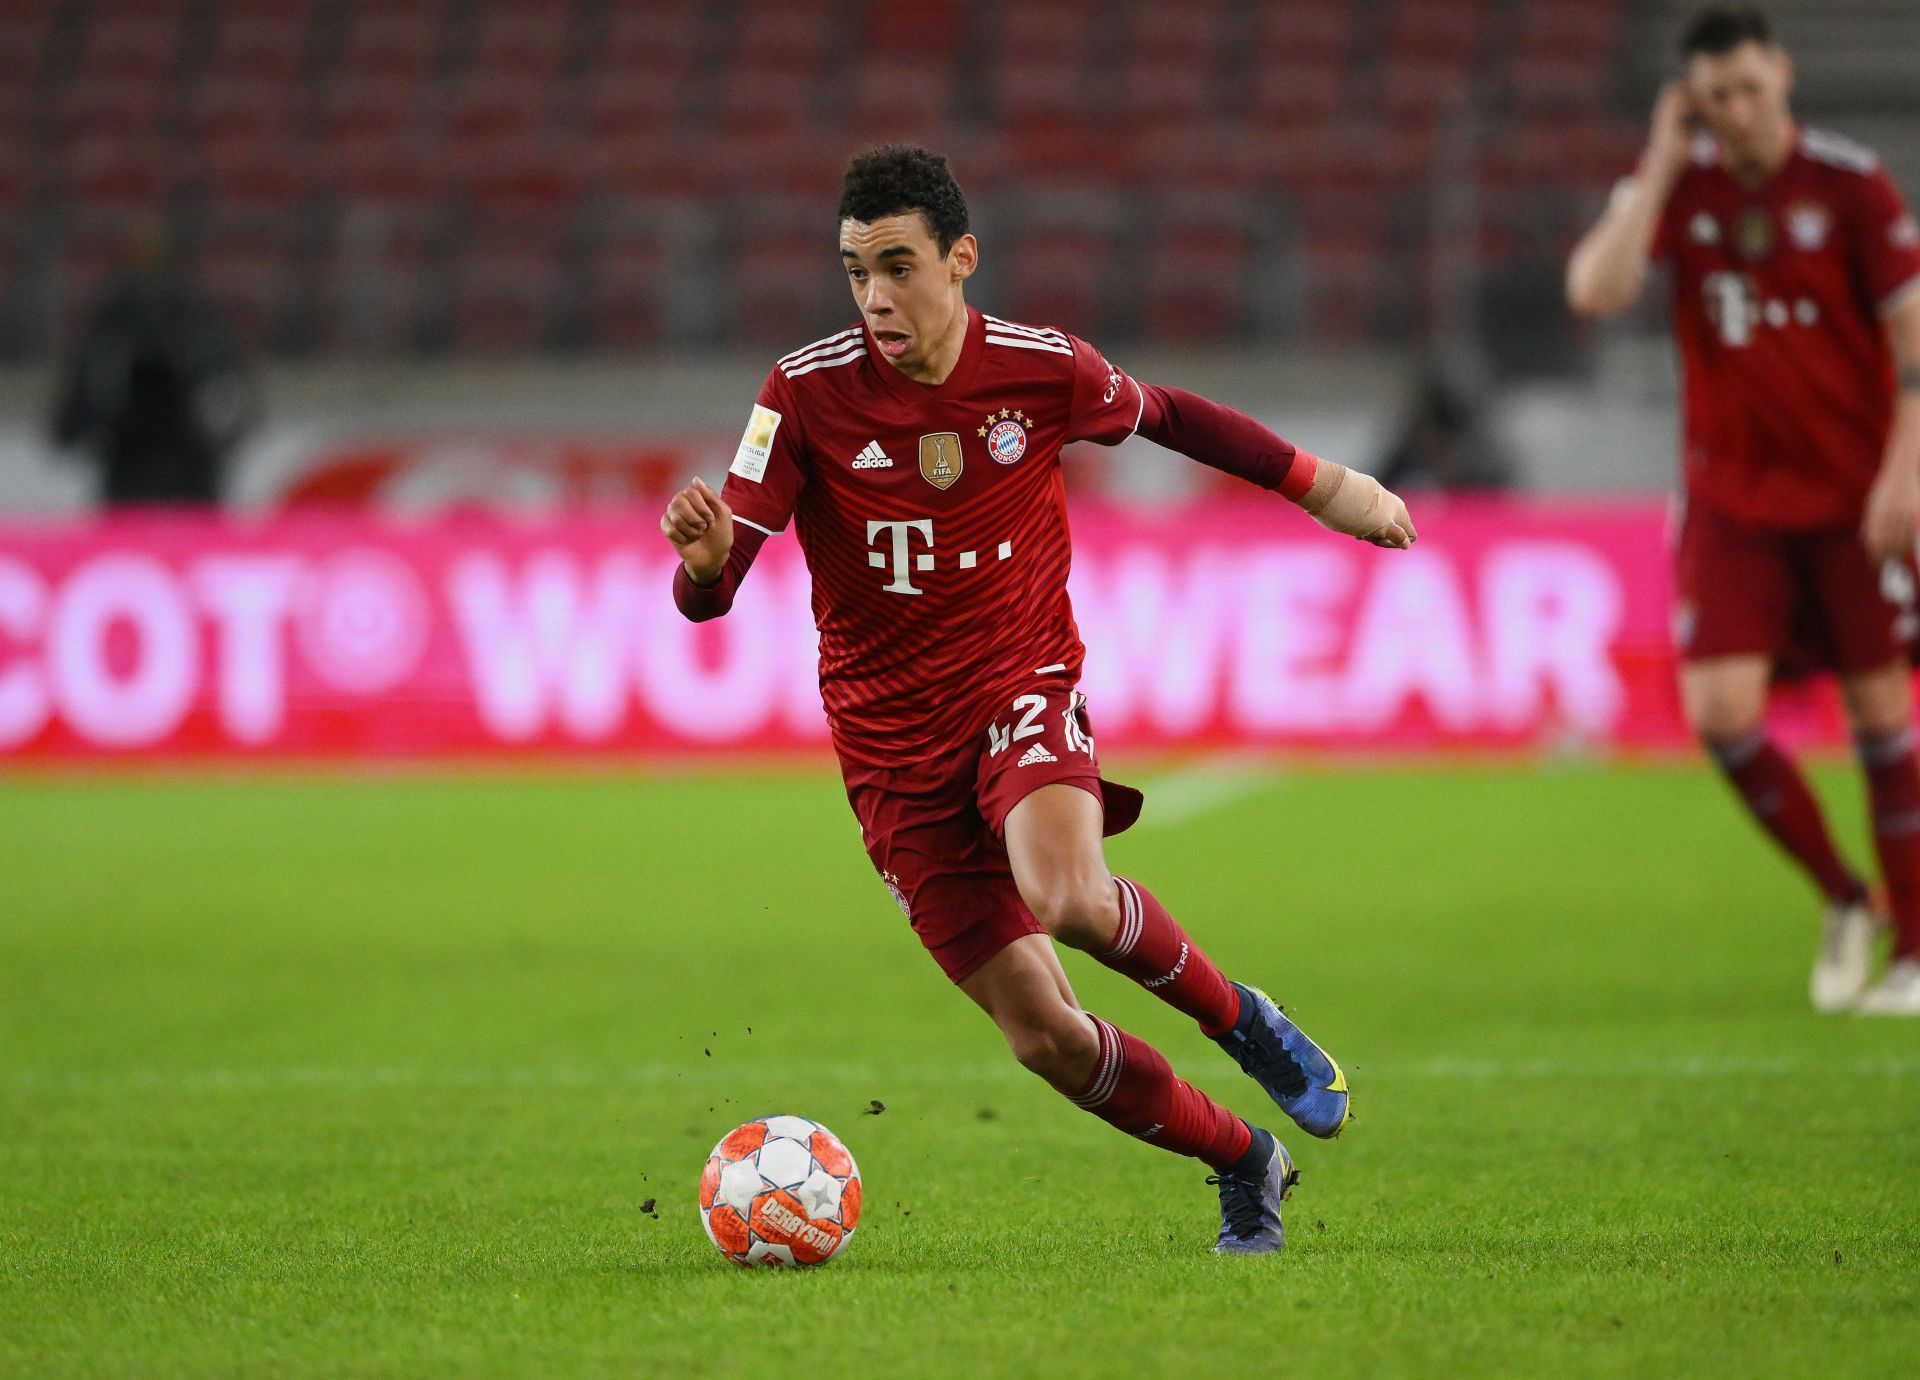 Jamal Musiala is considered the next big Bayern Munich and Germany star.